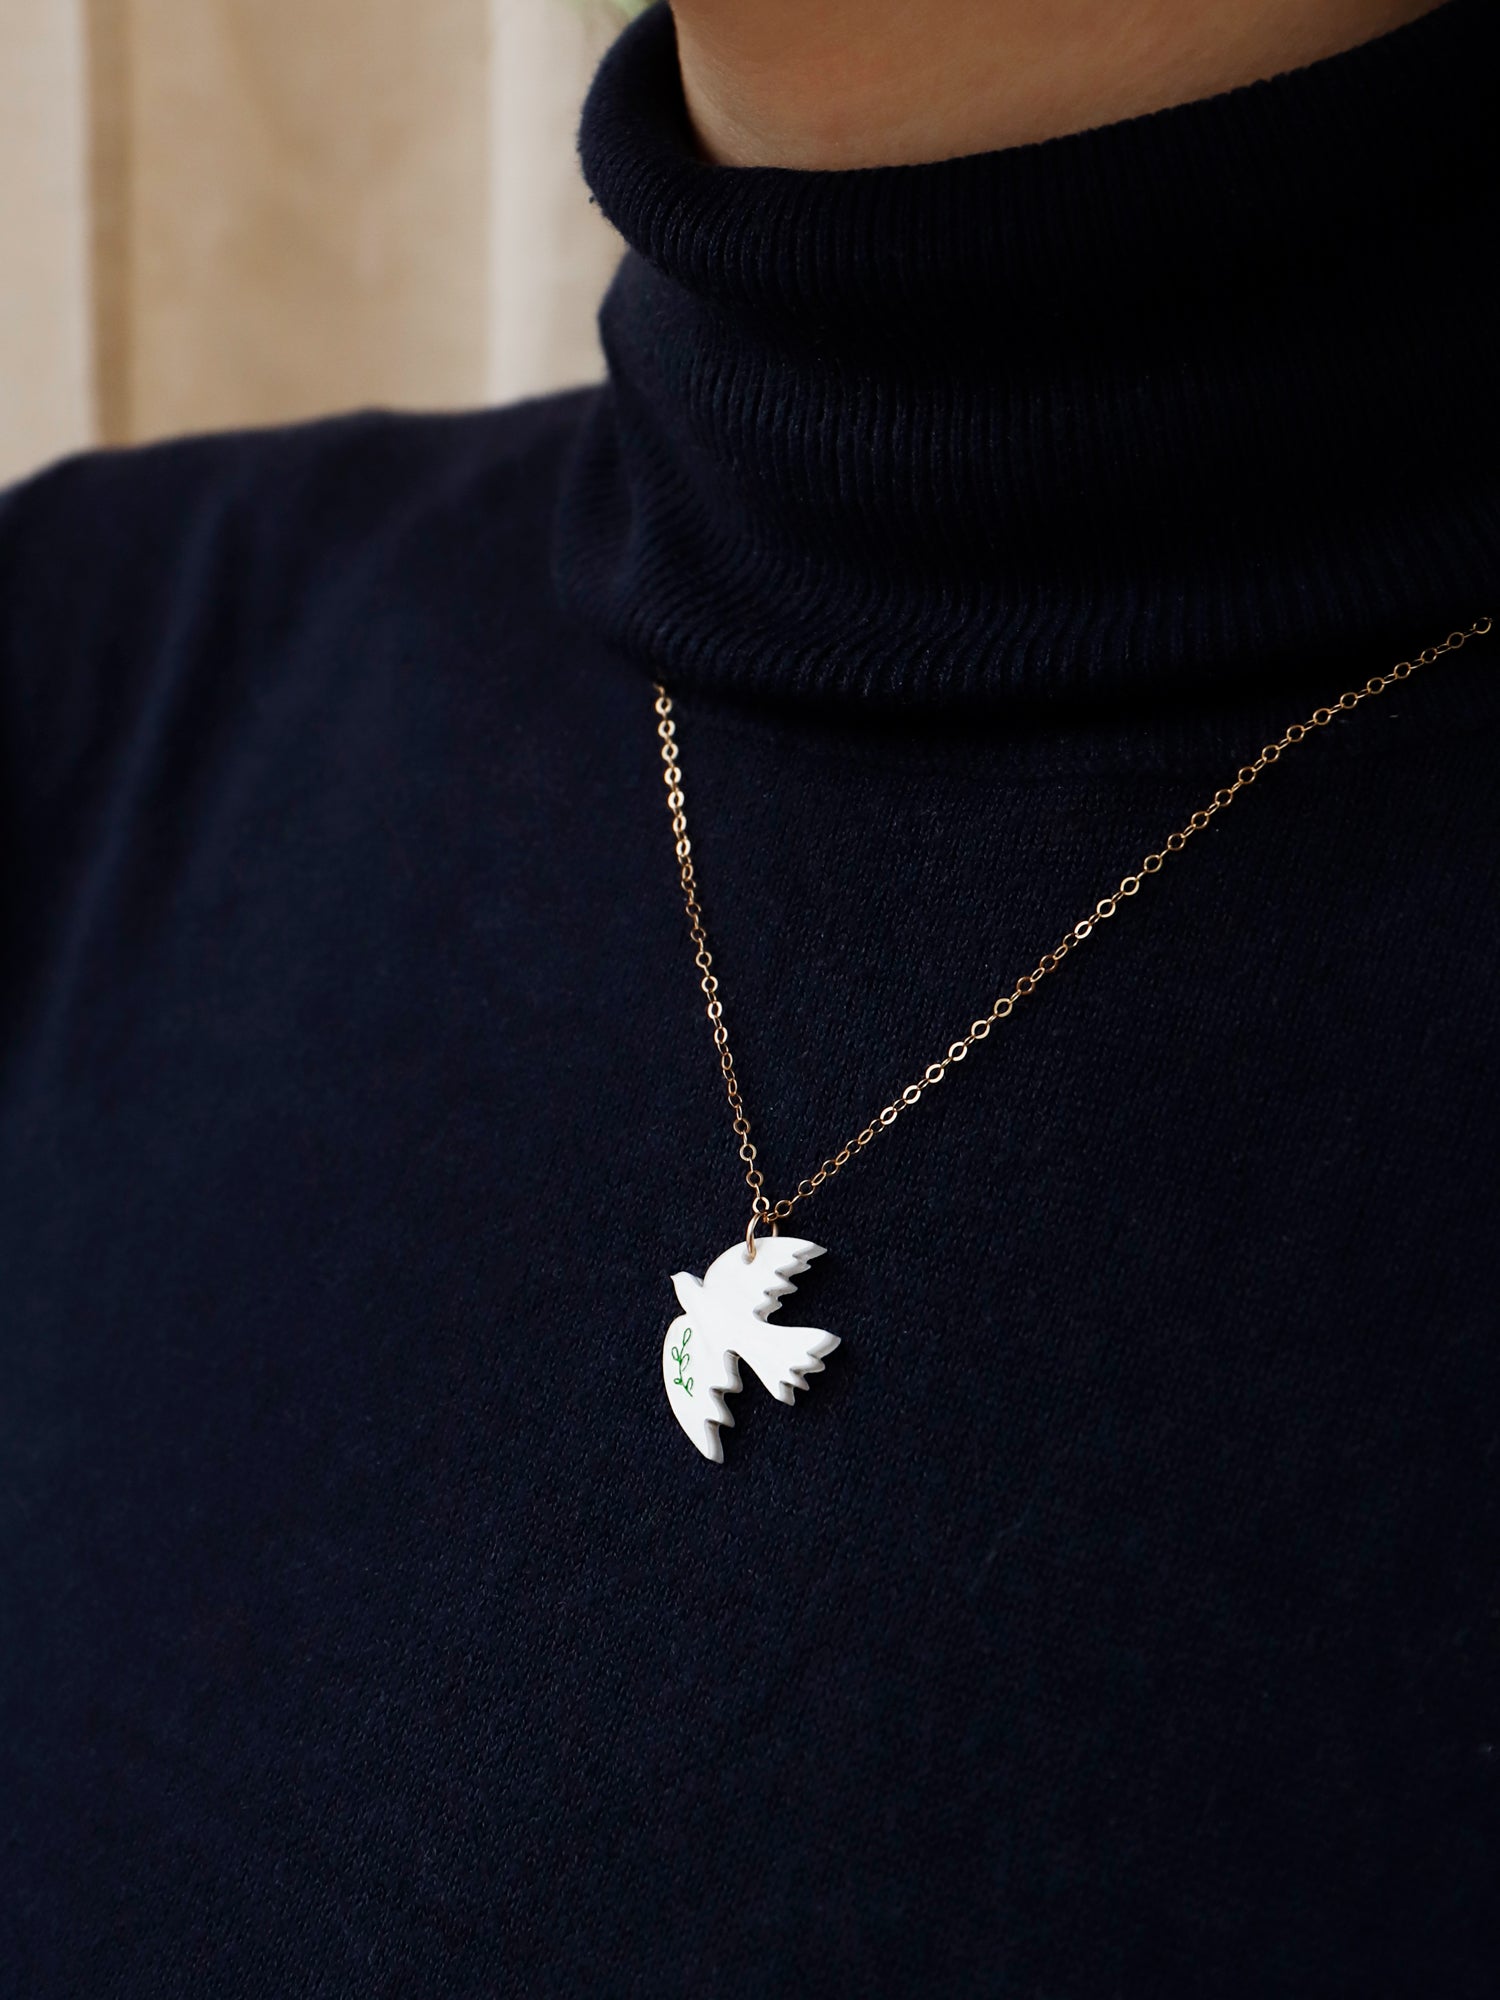 Dove Necklace - Medical Aid for Palestinians Fundraiser